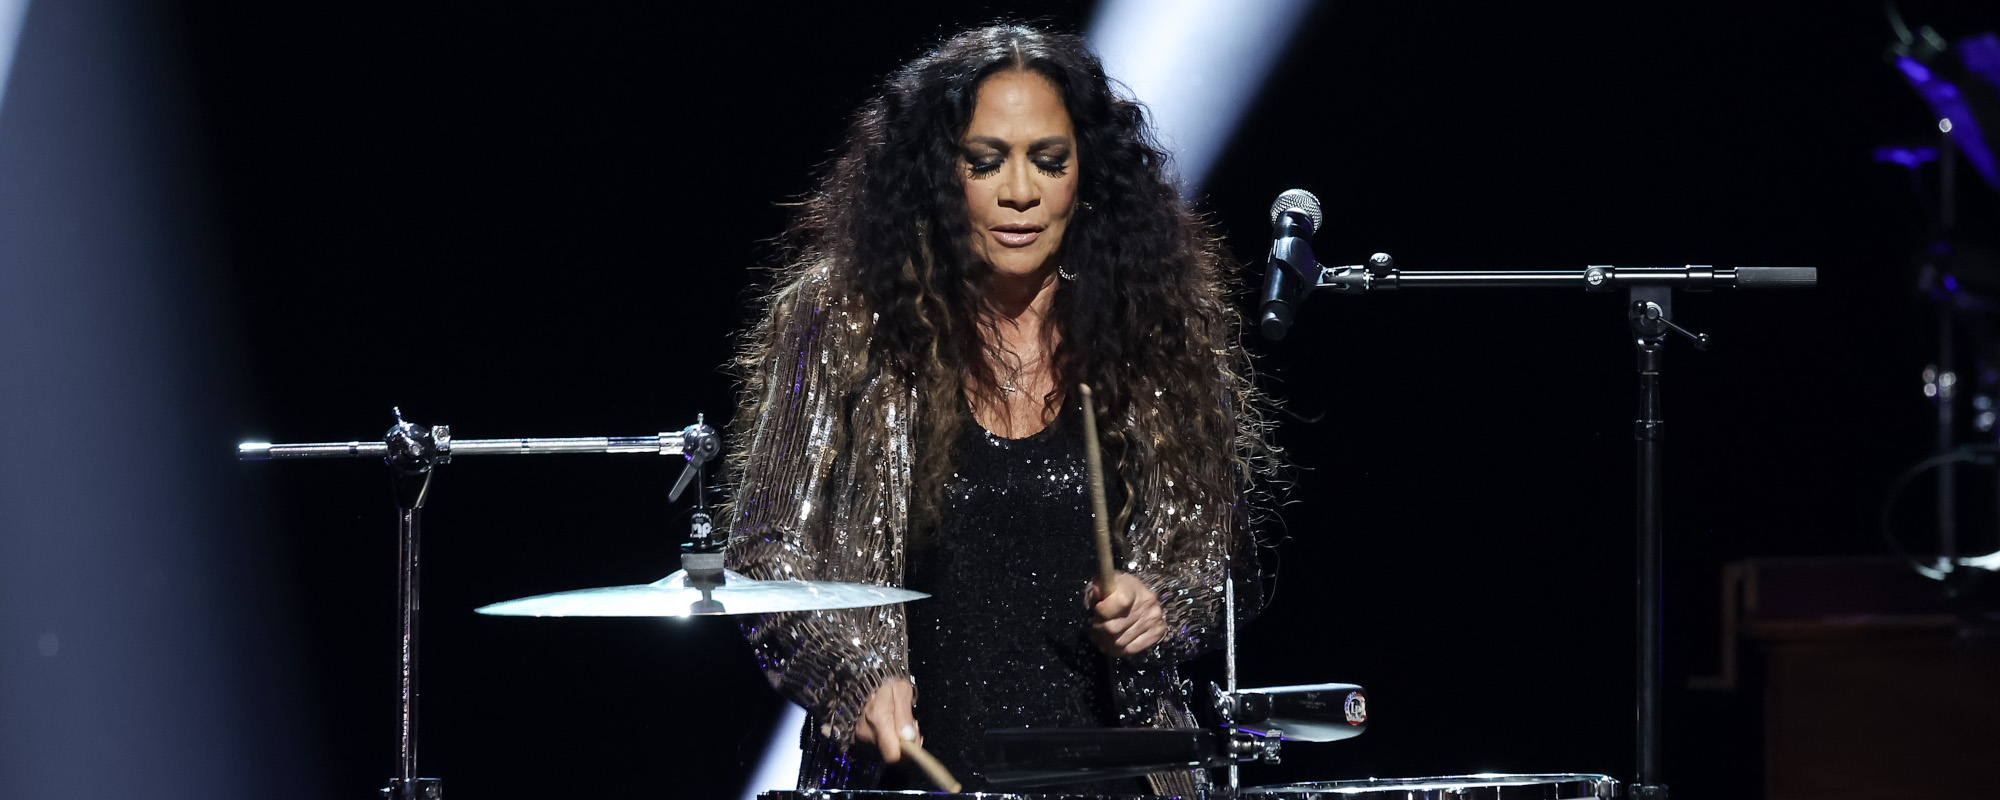 The Meaning Behind a Song Made for the ’80s, “The Glamorous Life” by Sheila E.